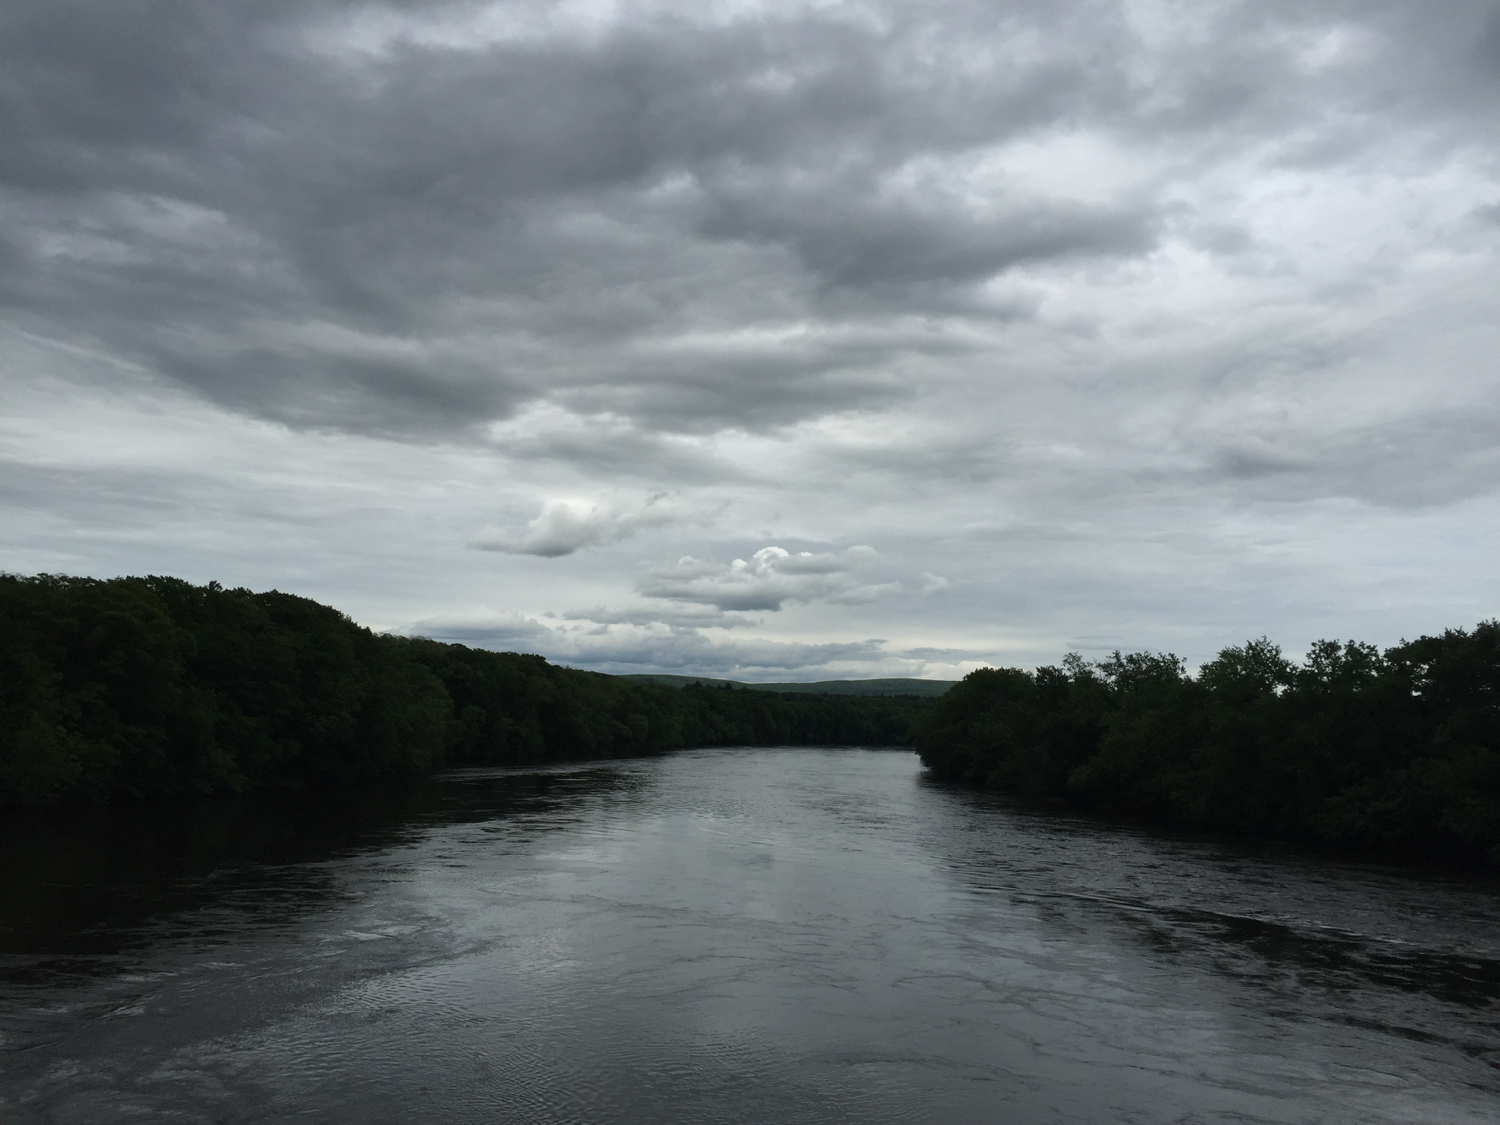 View from a bridge — copyright Trace Meek